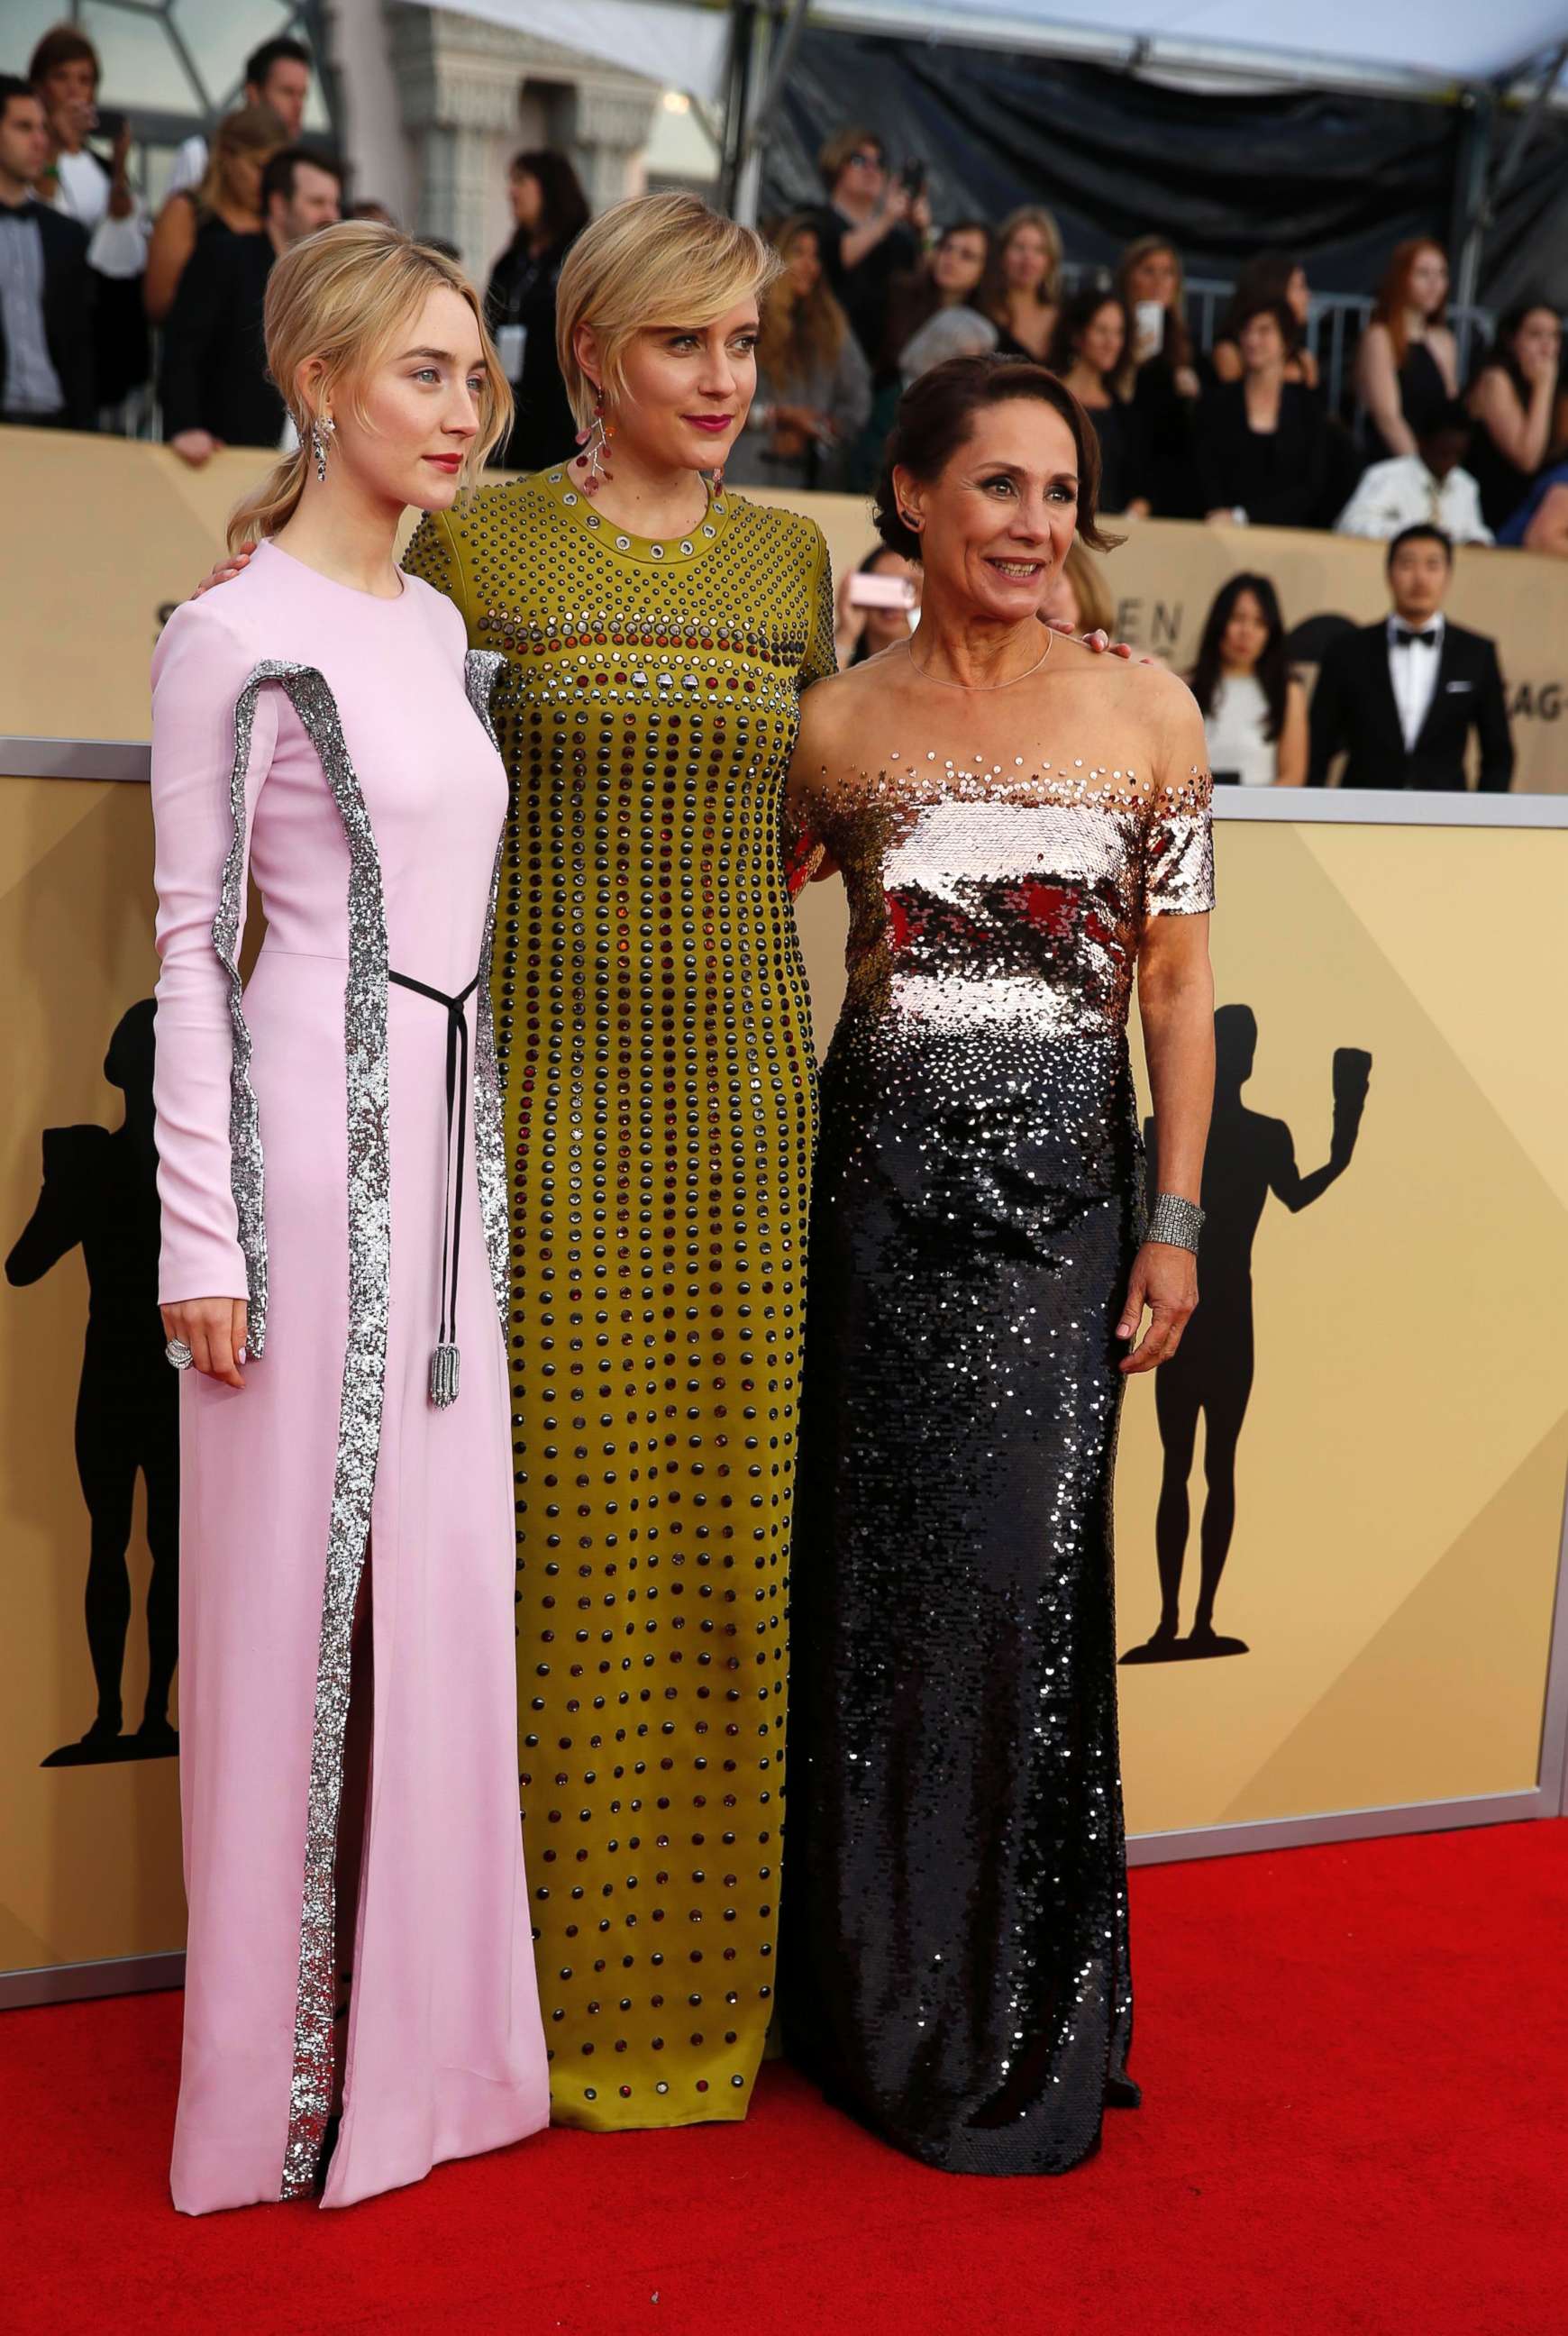 PHOTO: Saoirse Ronan, Greta Gerwig and Laurie Metcalf are pictured on the red carpet for the 24th Screen Actor's Guild Awards in Los Angeles, Jan. 21, 2018.